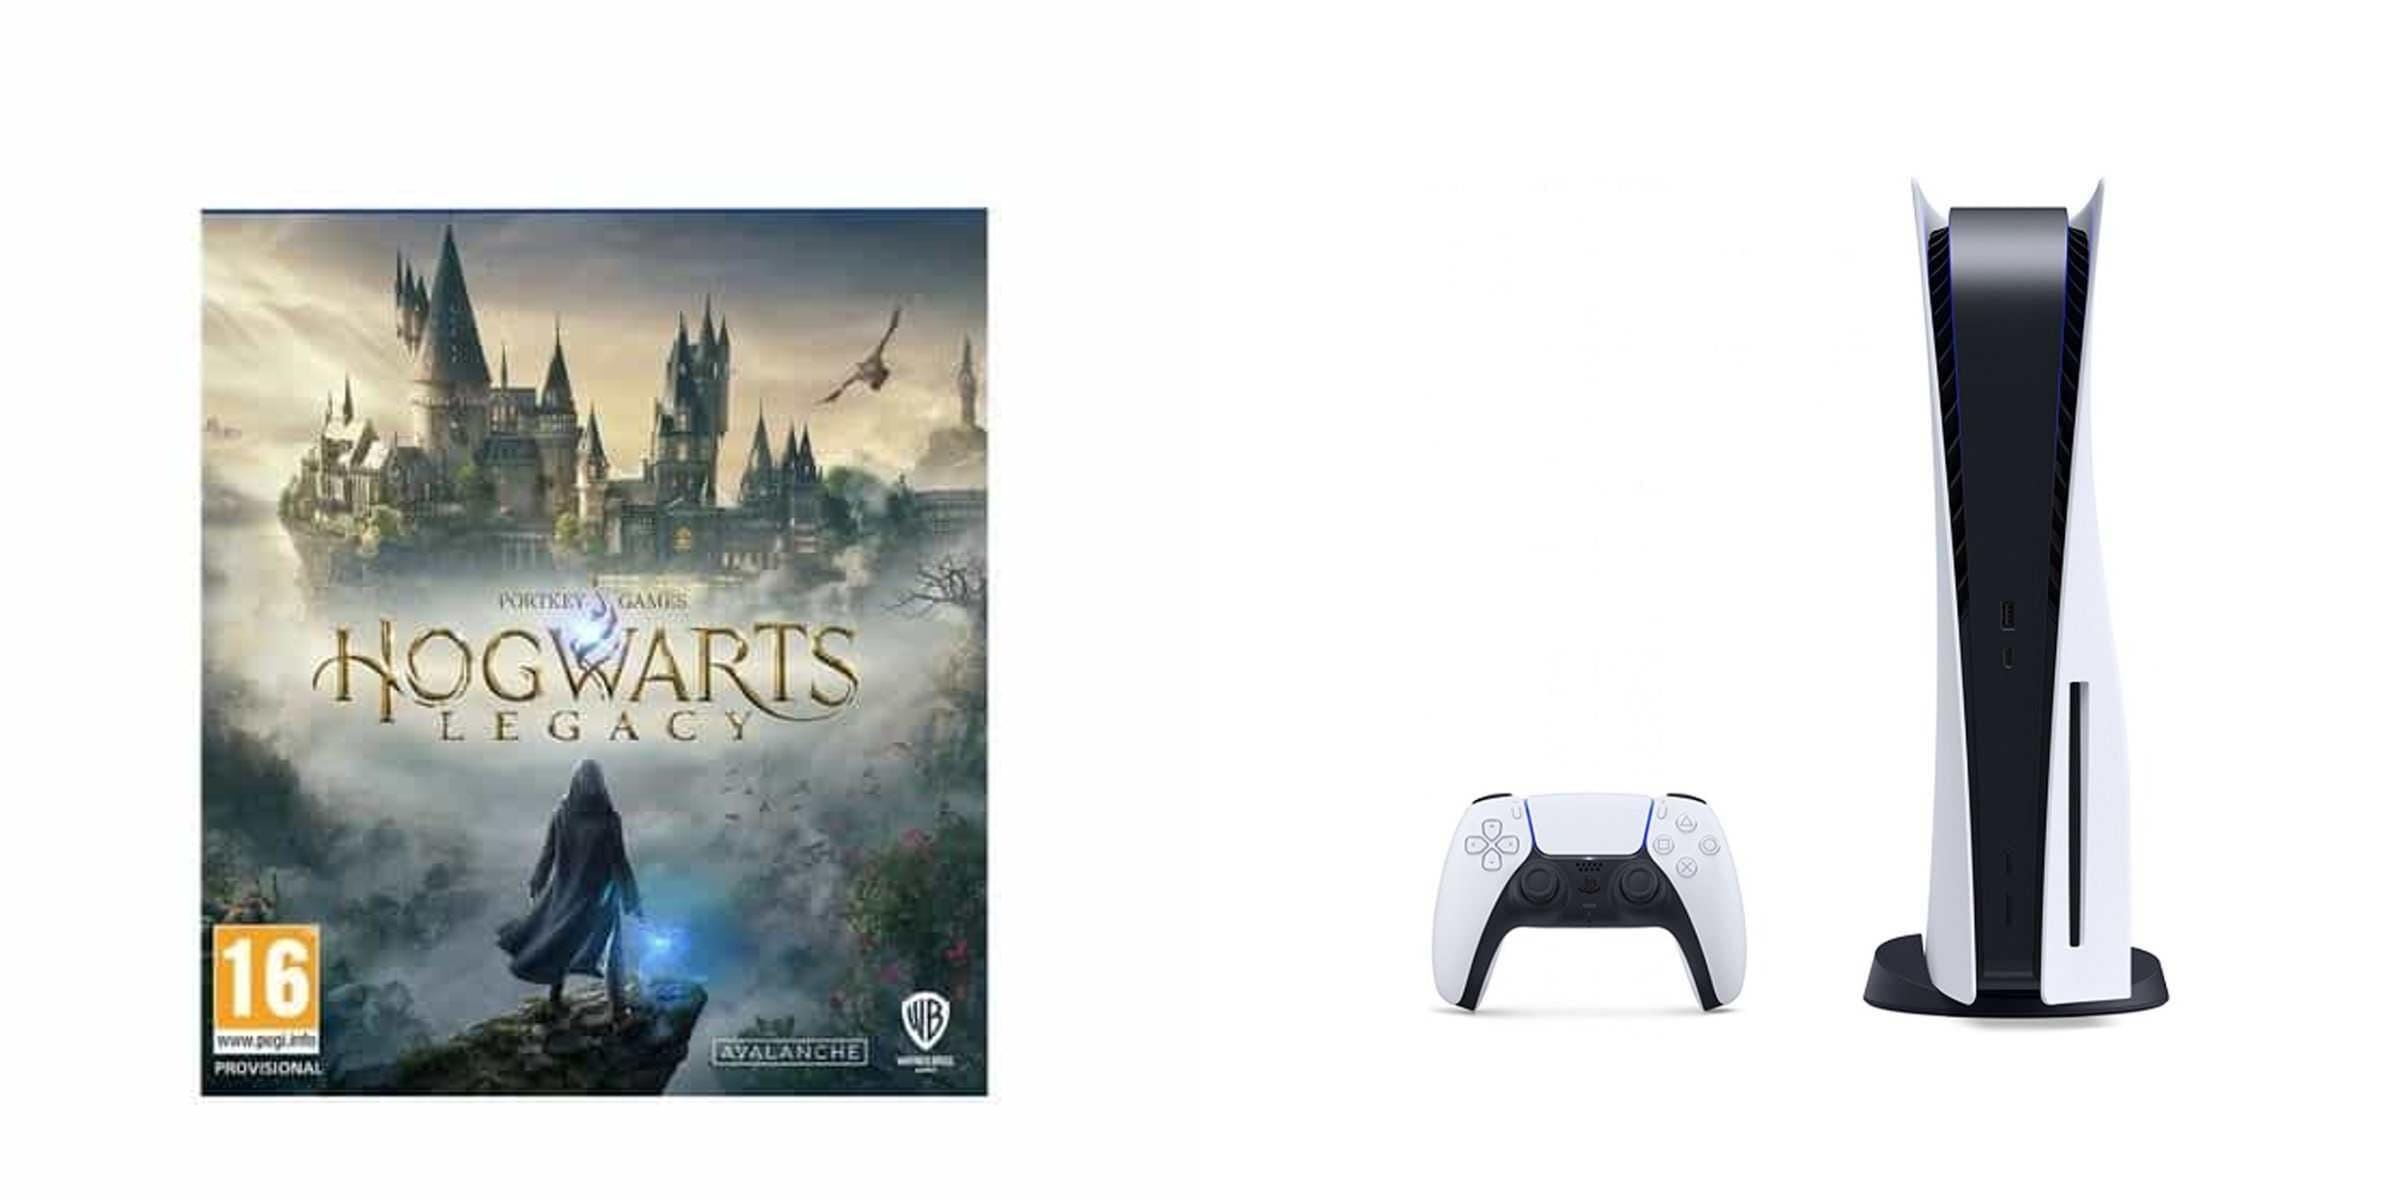 Sony PlayStation 5, 1 Wireless Controller, White - CFI-1016A01 MEE, with WB Games Hogwarts Legacy Int'l Version for PlayStation 5